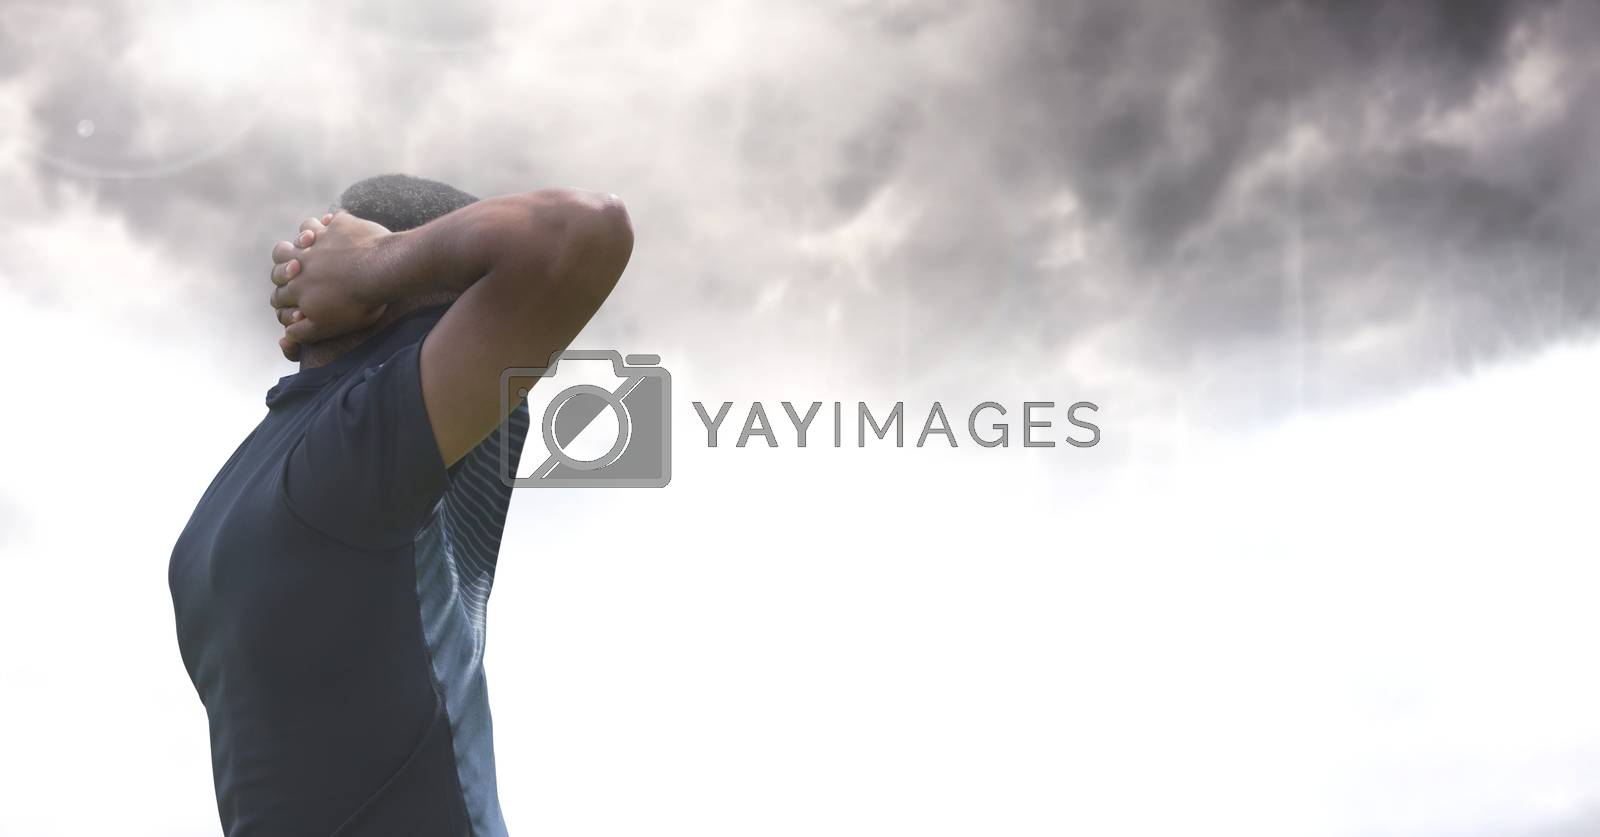 Royalty free image of Disappointed sports player with sky by Wavebreakmedia